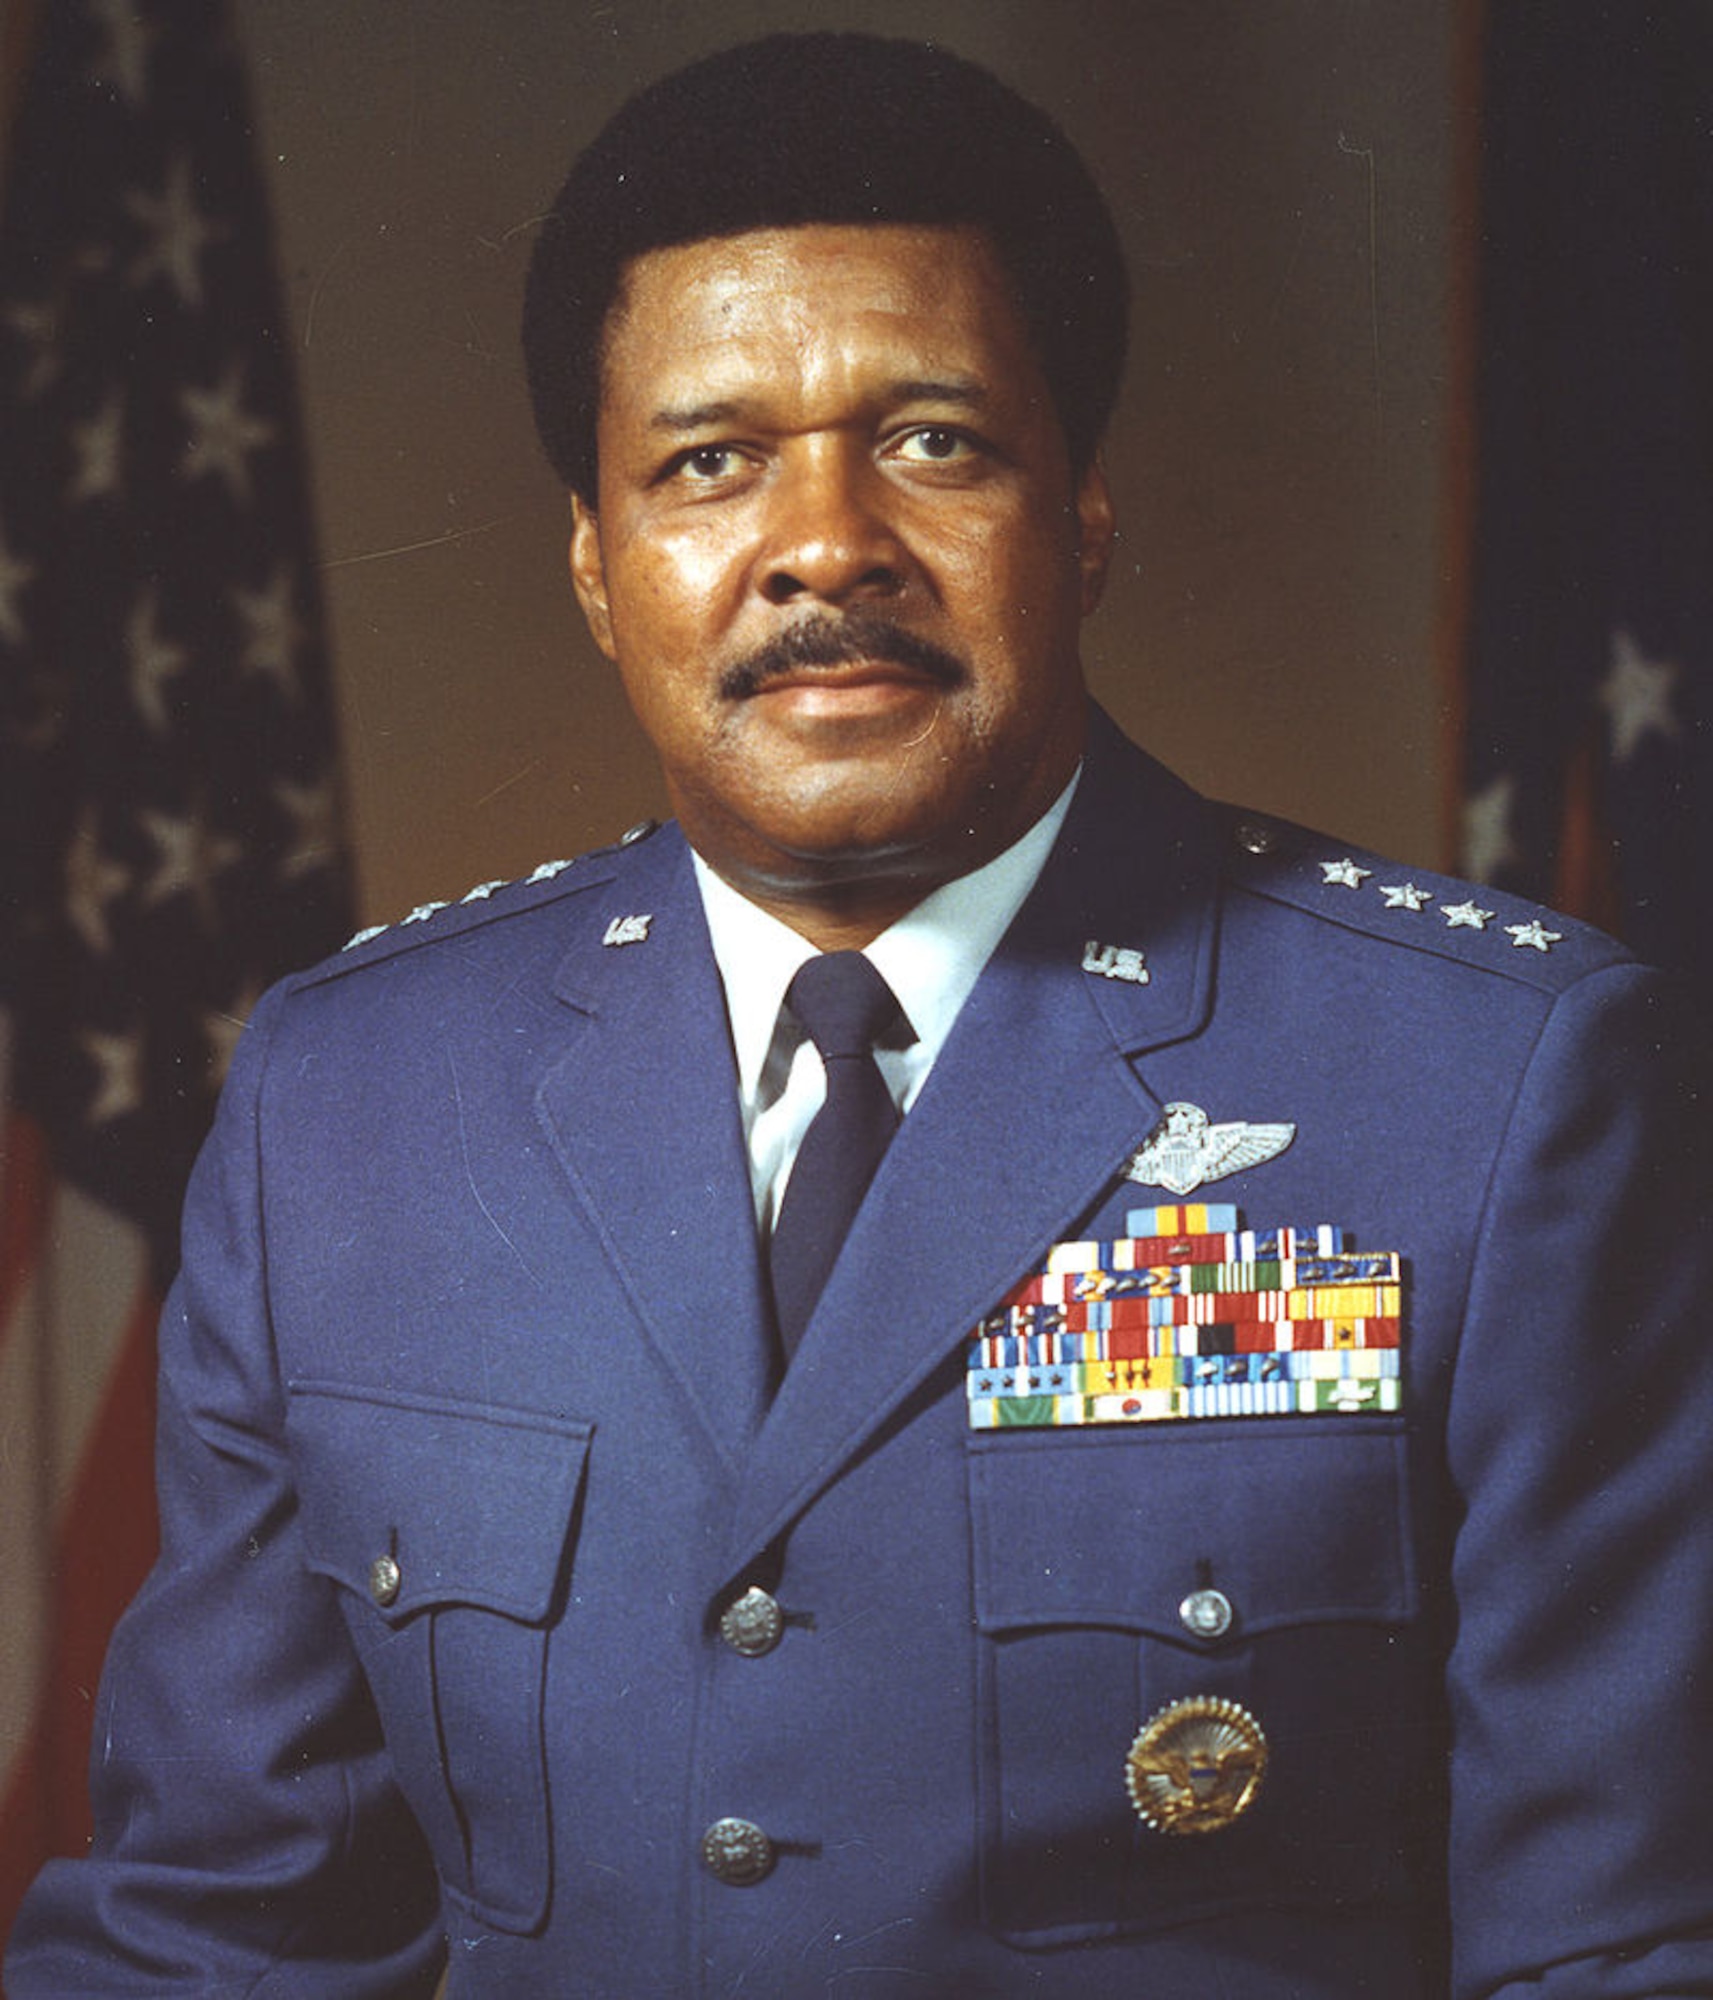 General Daniel "Chappie" James, Jr., former special assistant to the chief of staff, U.S. Air Force, attended the Tuskegee Institute from September 1937 to March 1942, where he received a Bachelor of Science in physical education and completed civilian pilot training under the government-sponsored Civilian Pilot Training Program. James also worked as a civilian instructor pilot at Tuskegee in the Army Air Corps Aviation Cadet Program until January 1943.